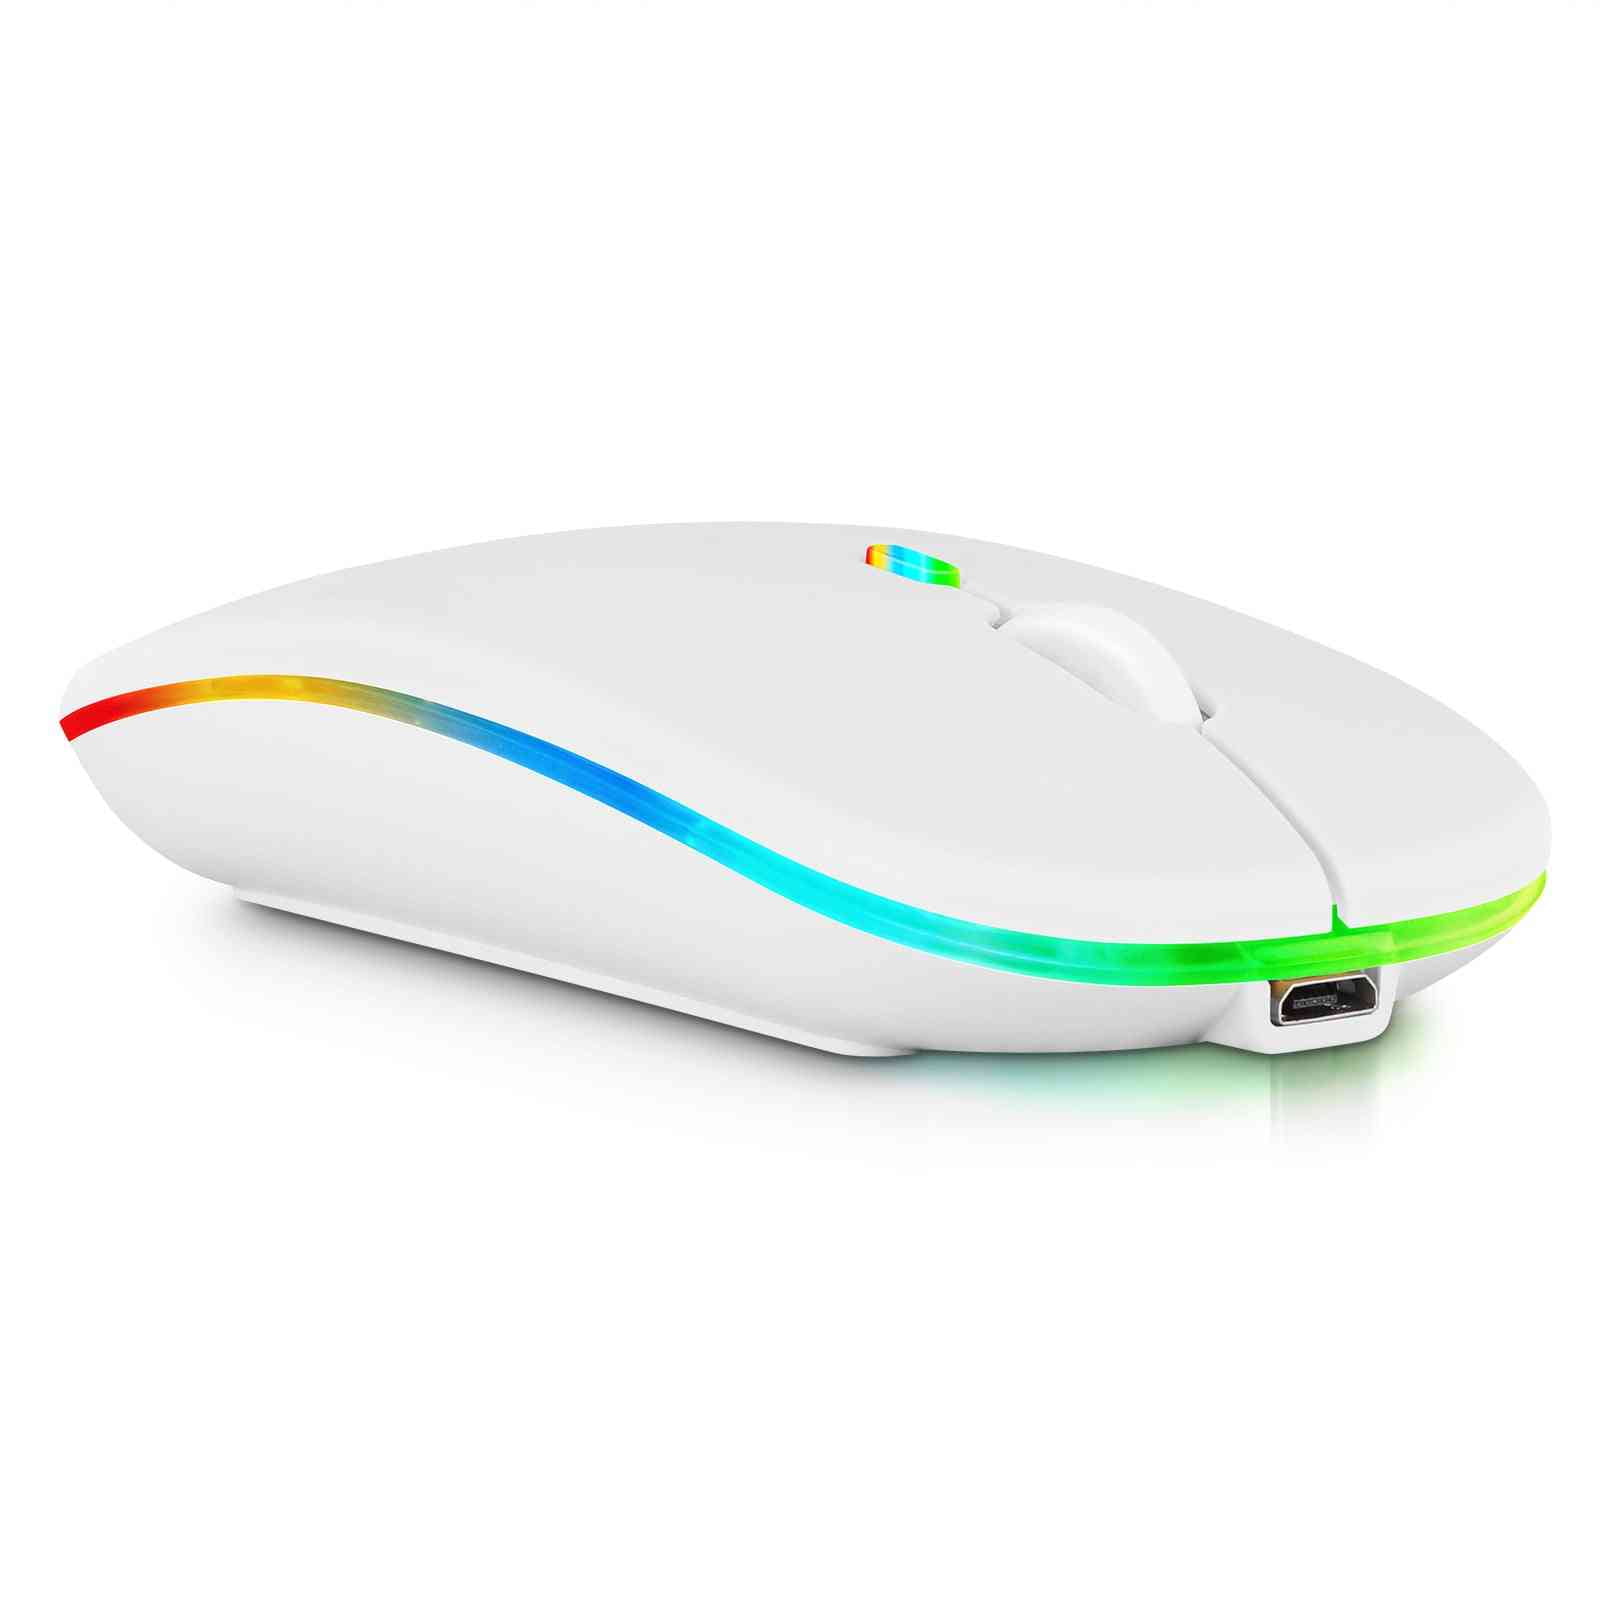 Bluetooth Mouse for Dell 7500 Laptop Bluetooth Wireless Mouse Designed for Laptop / PC / Mac / iPad pro / Computer / Tablet RGB LED Pure White - Walmart.com